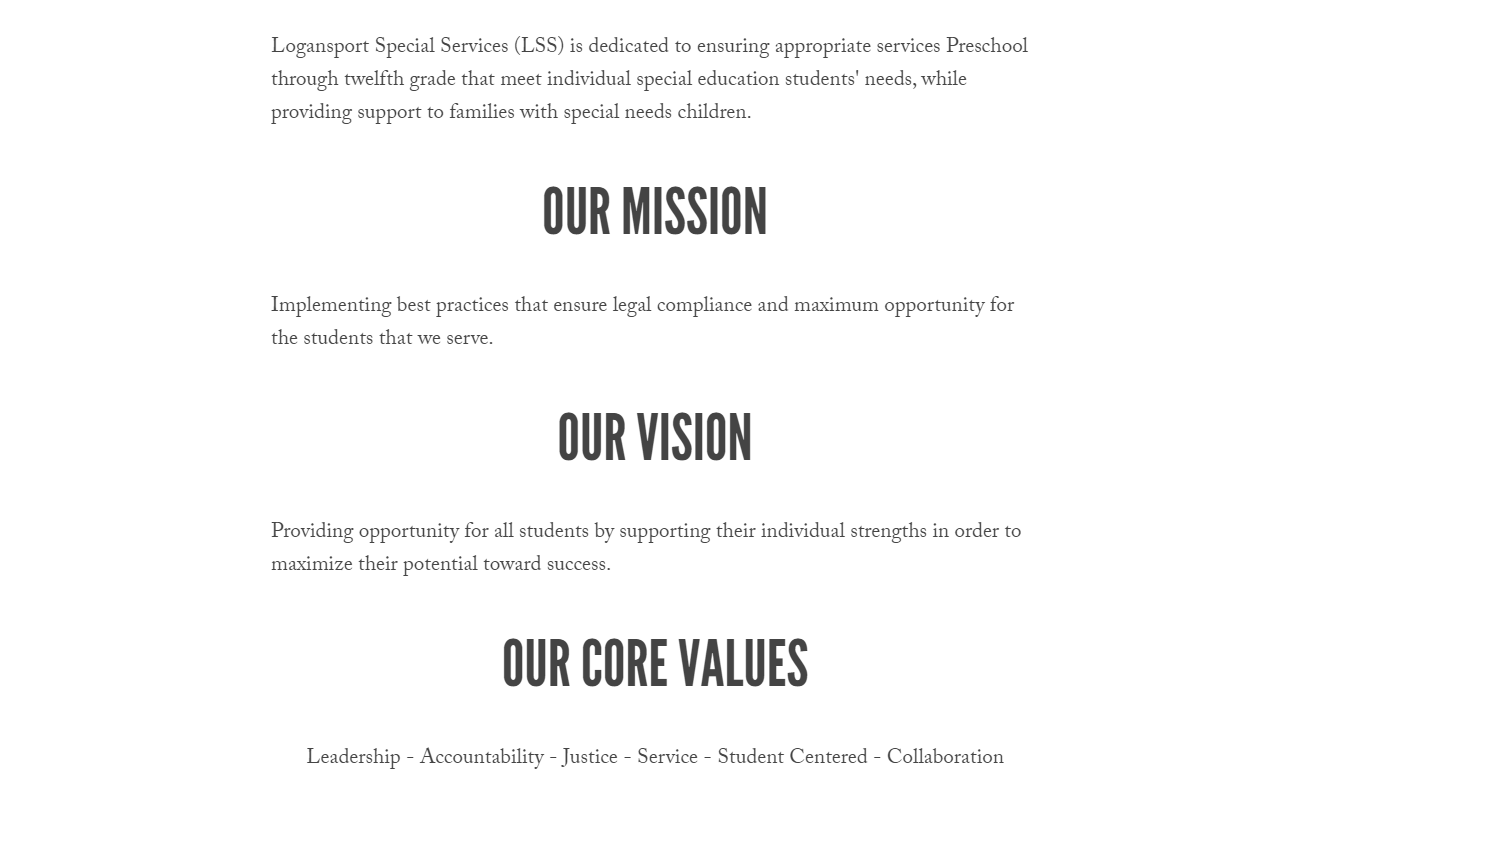 Our Mission, Our Vision, and Our Core Values